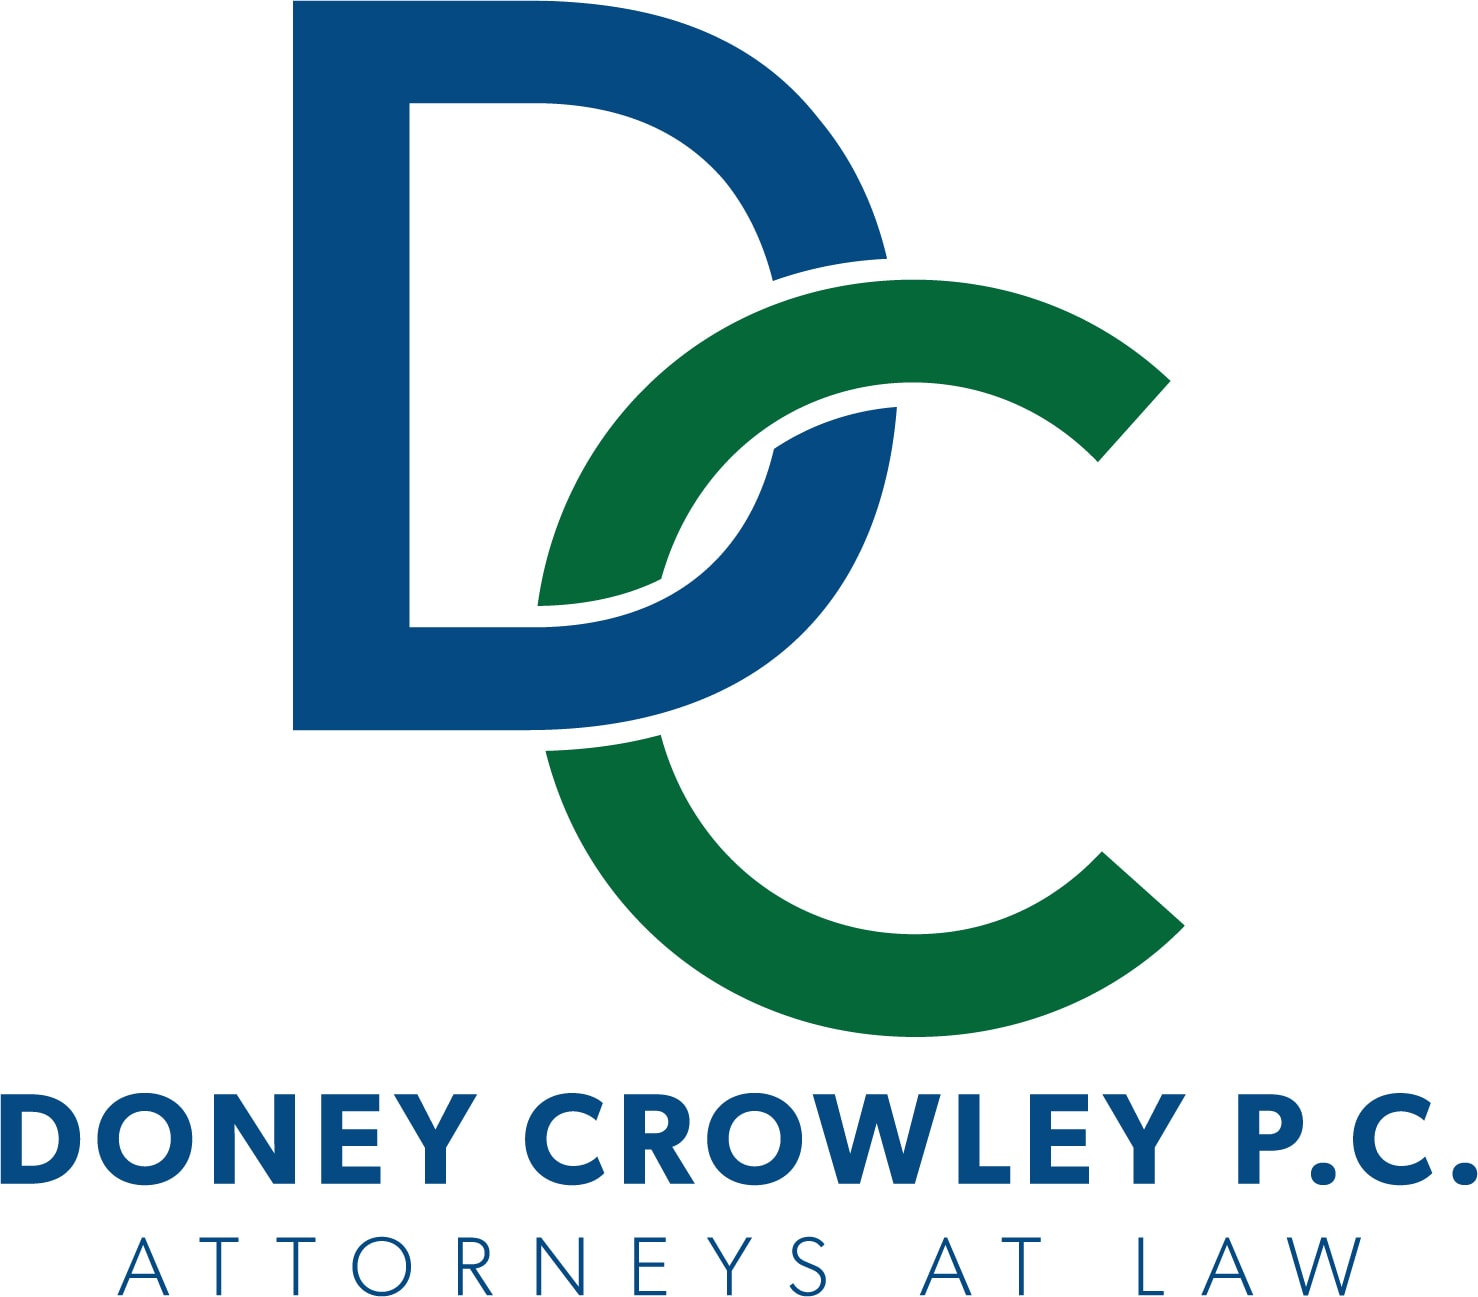 Environmental & Natural Resource Law Doney Crowley P.C. Attorneys at Law